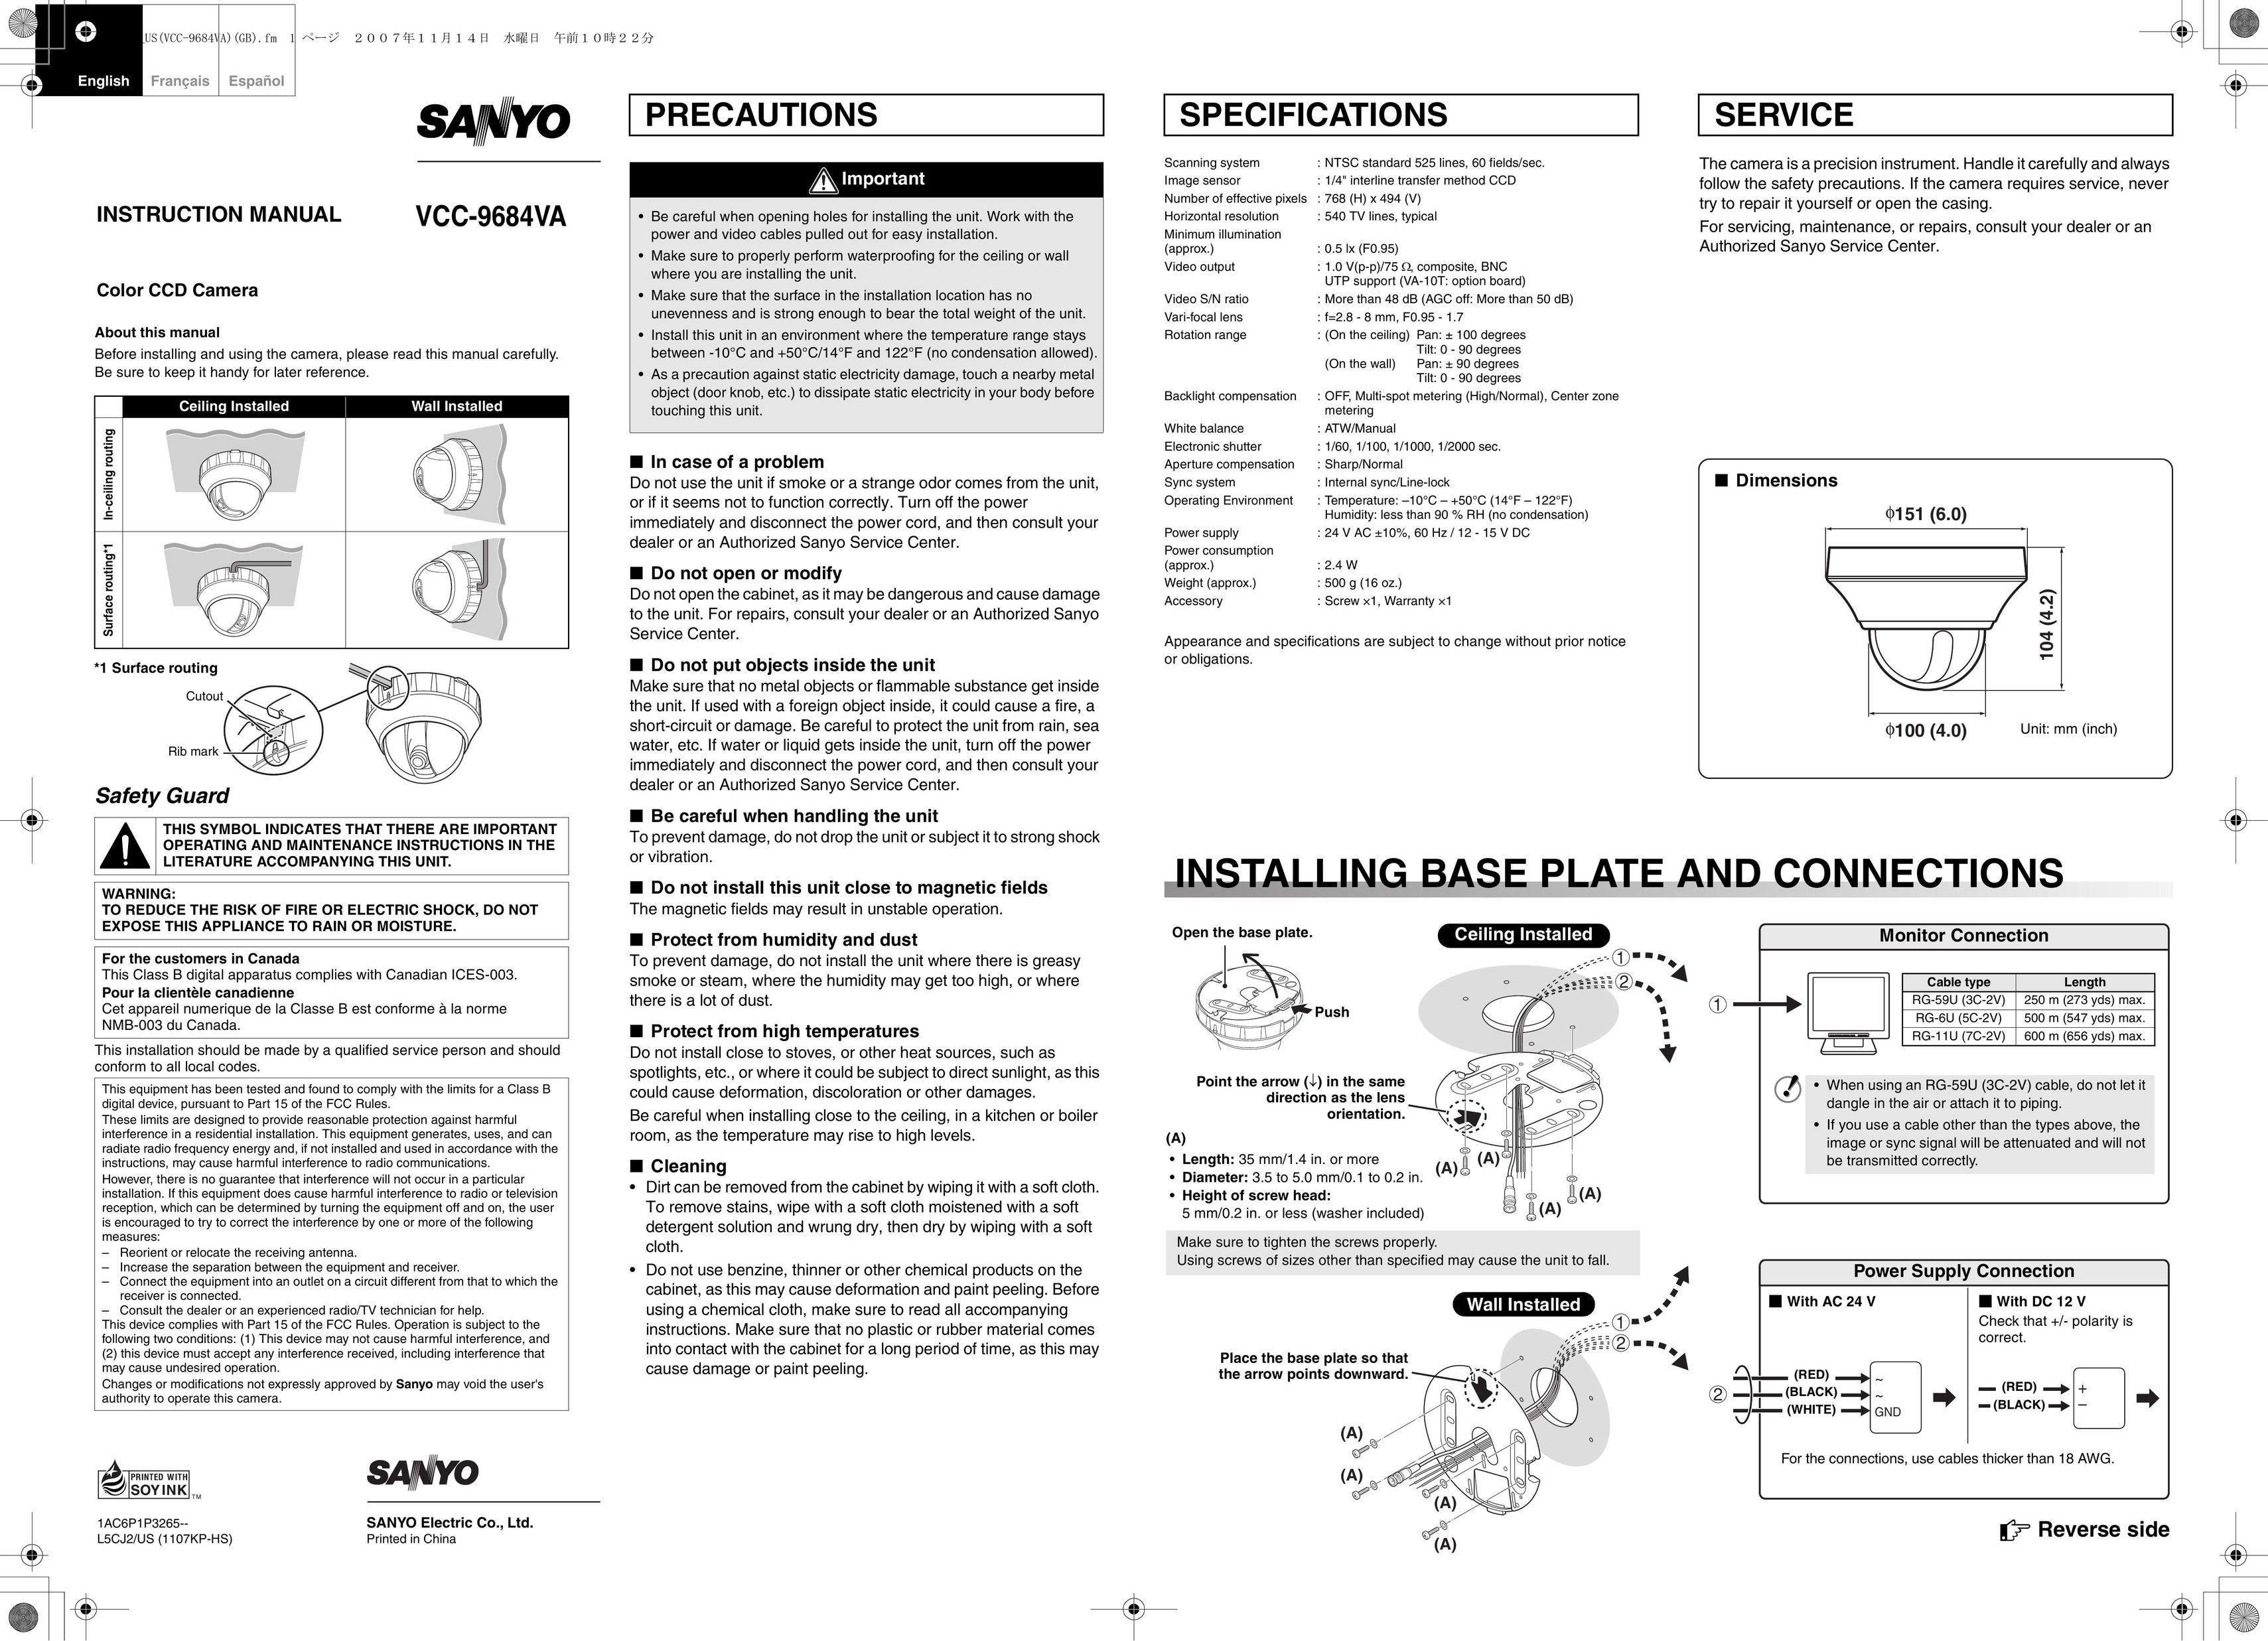 Sanyo VCC-9684VA Home Security System User Manual